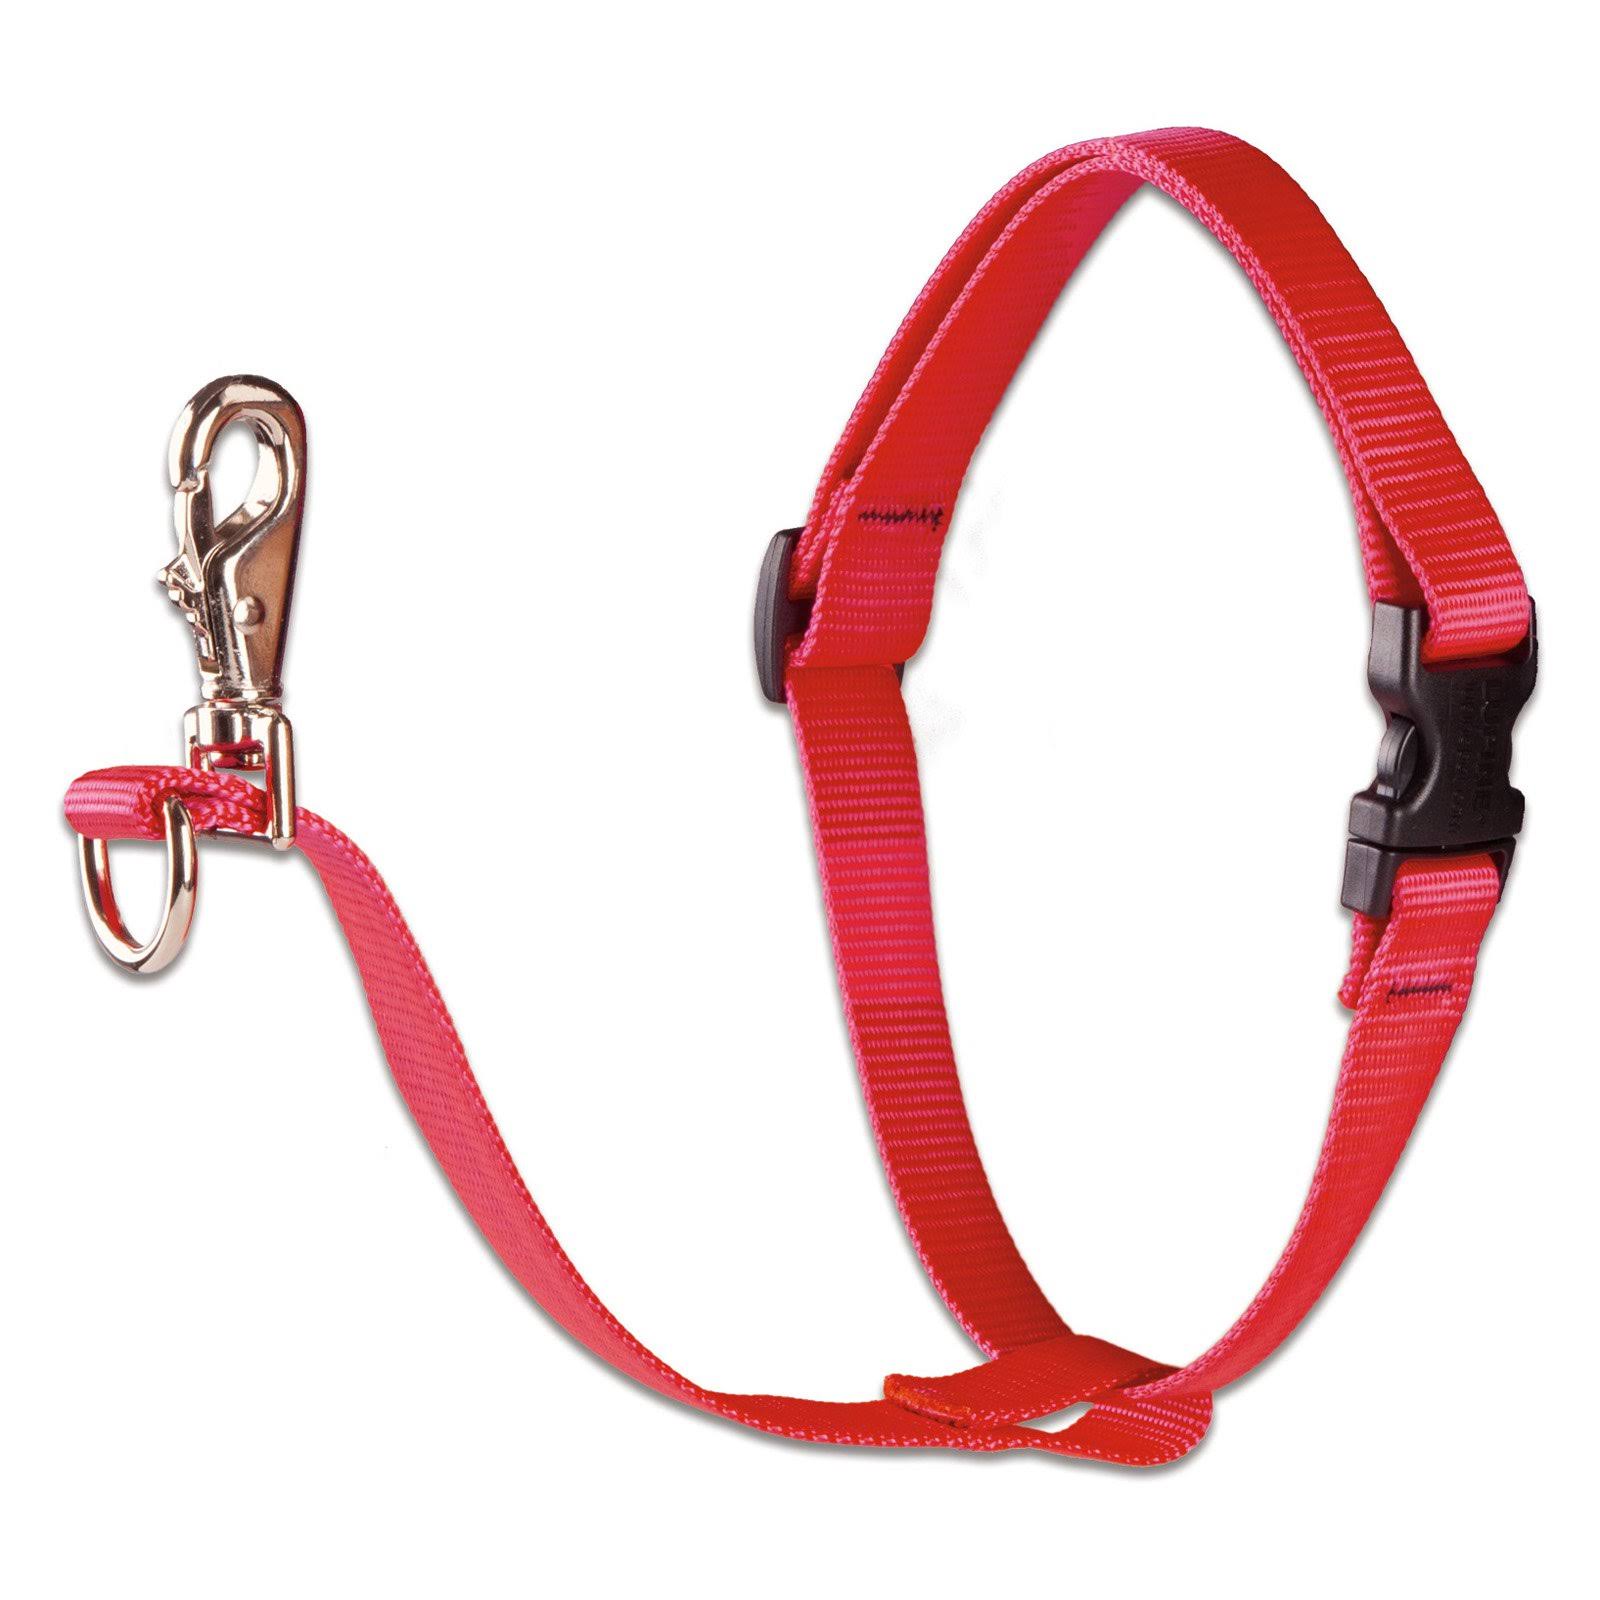 Lupine Collars & Leads - Red, 1 x 24-38 in